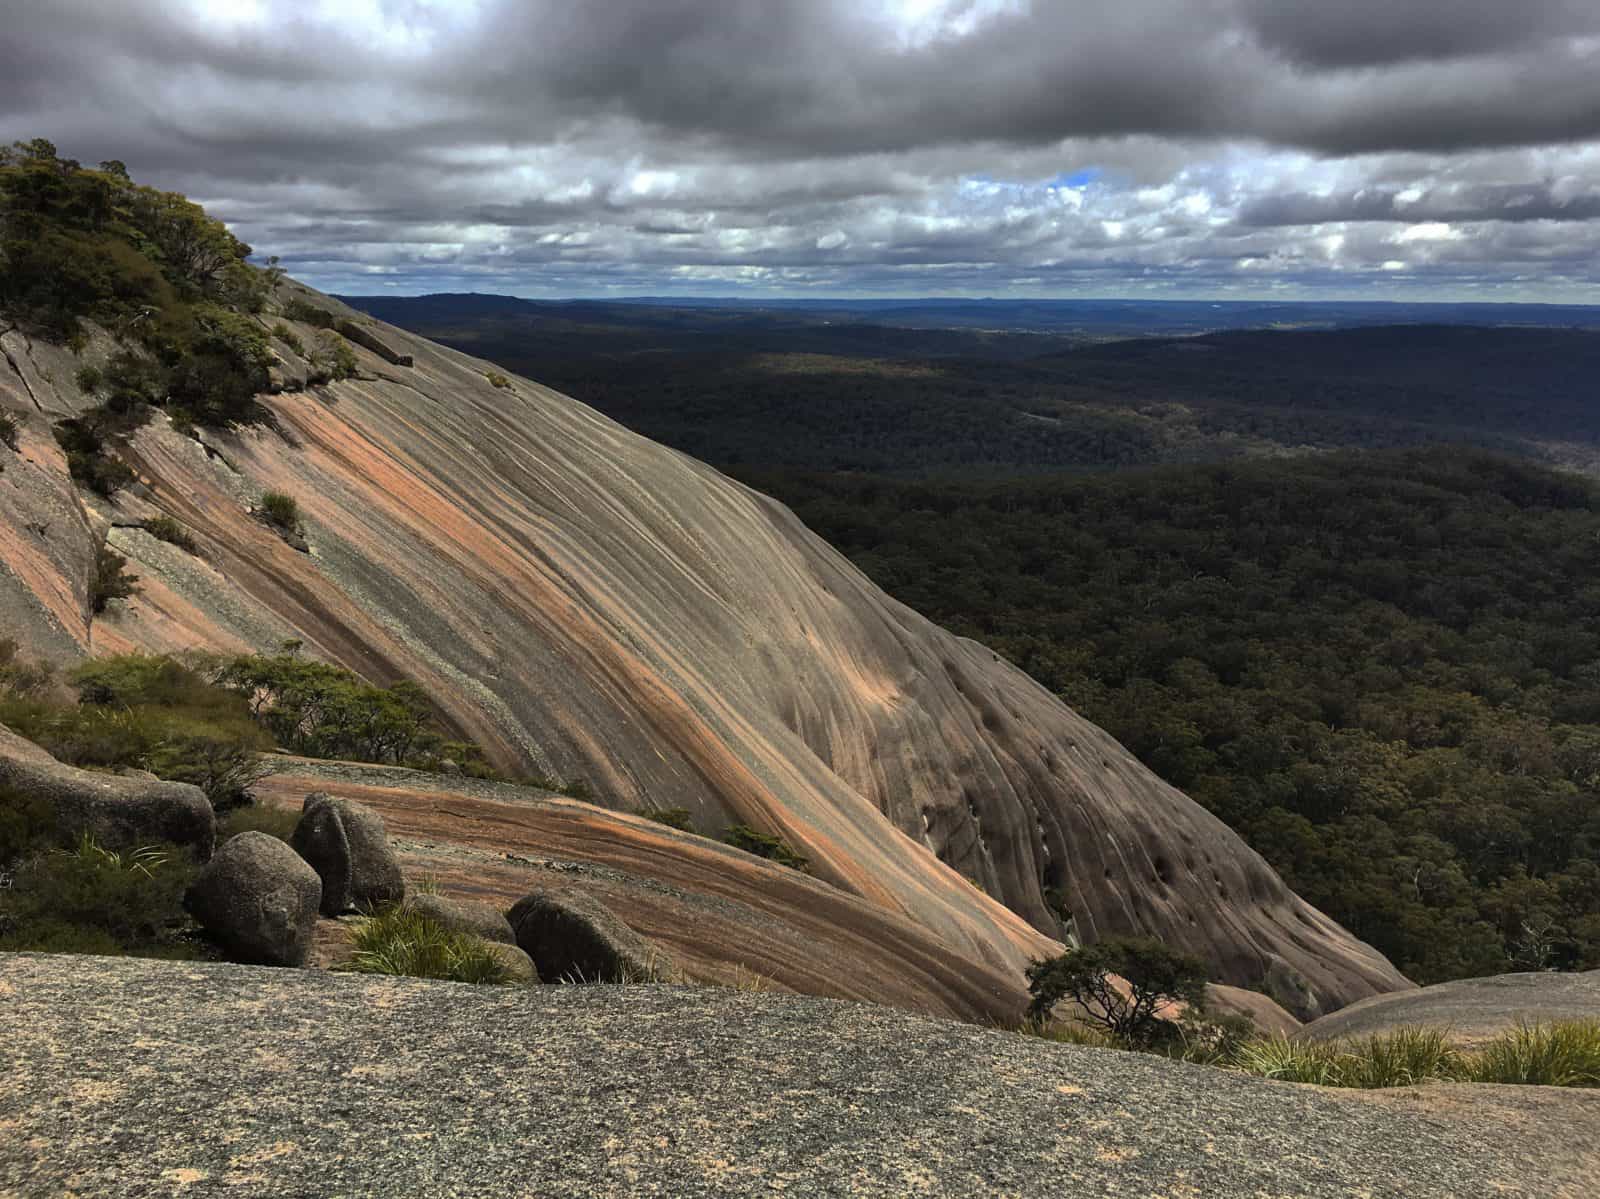 Bald Rock - the largest granite monolith in the Southern Hemisphere offers walkers incredible views